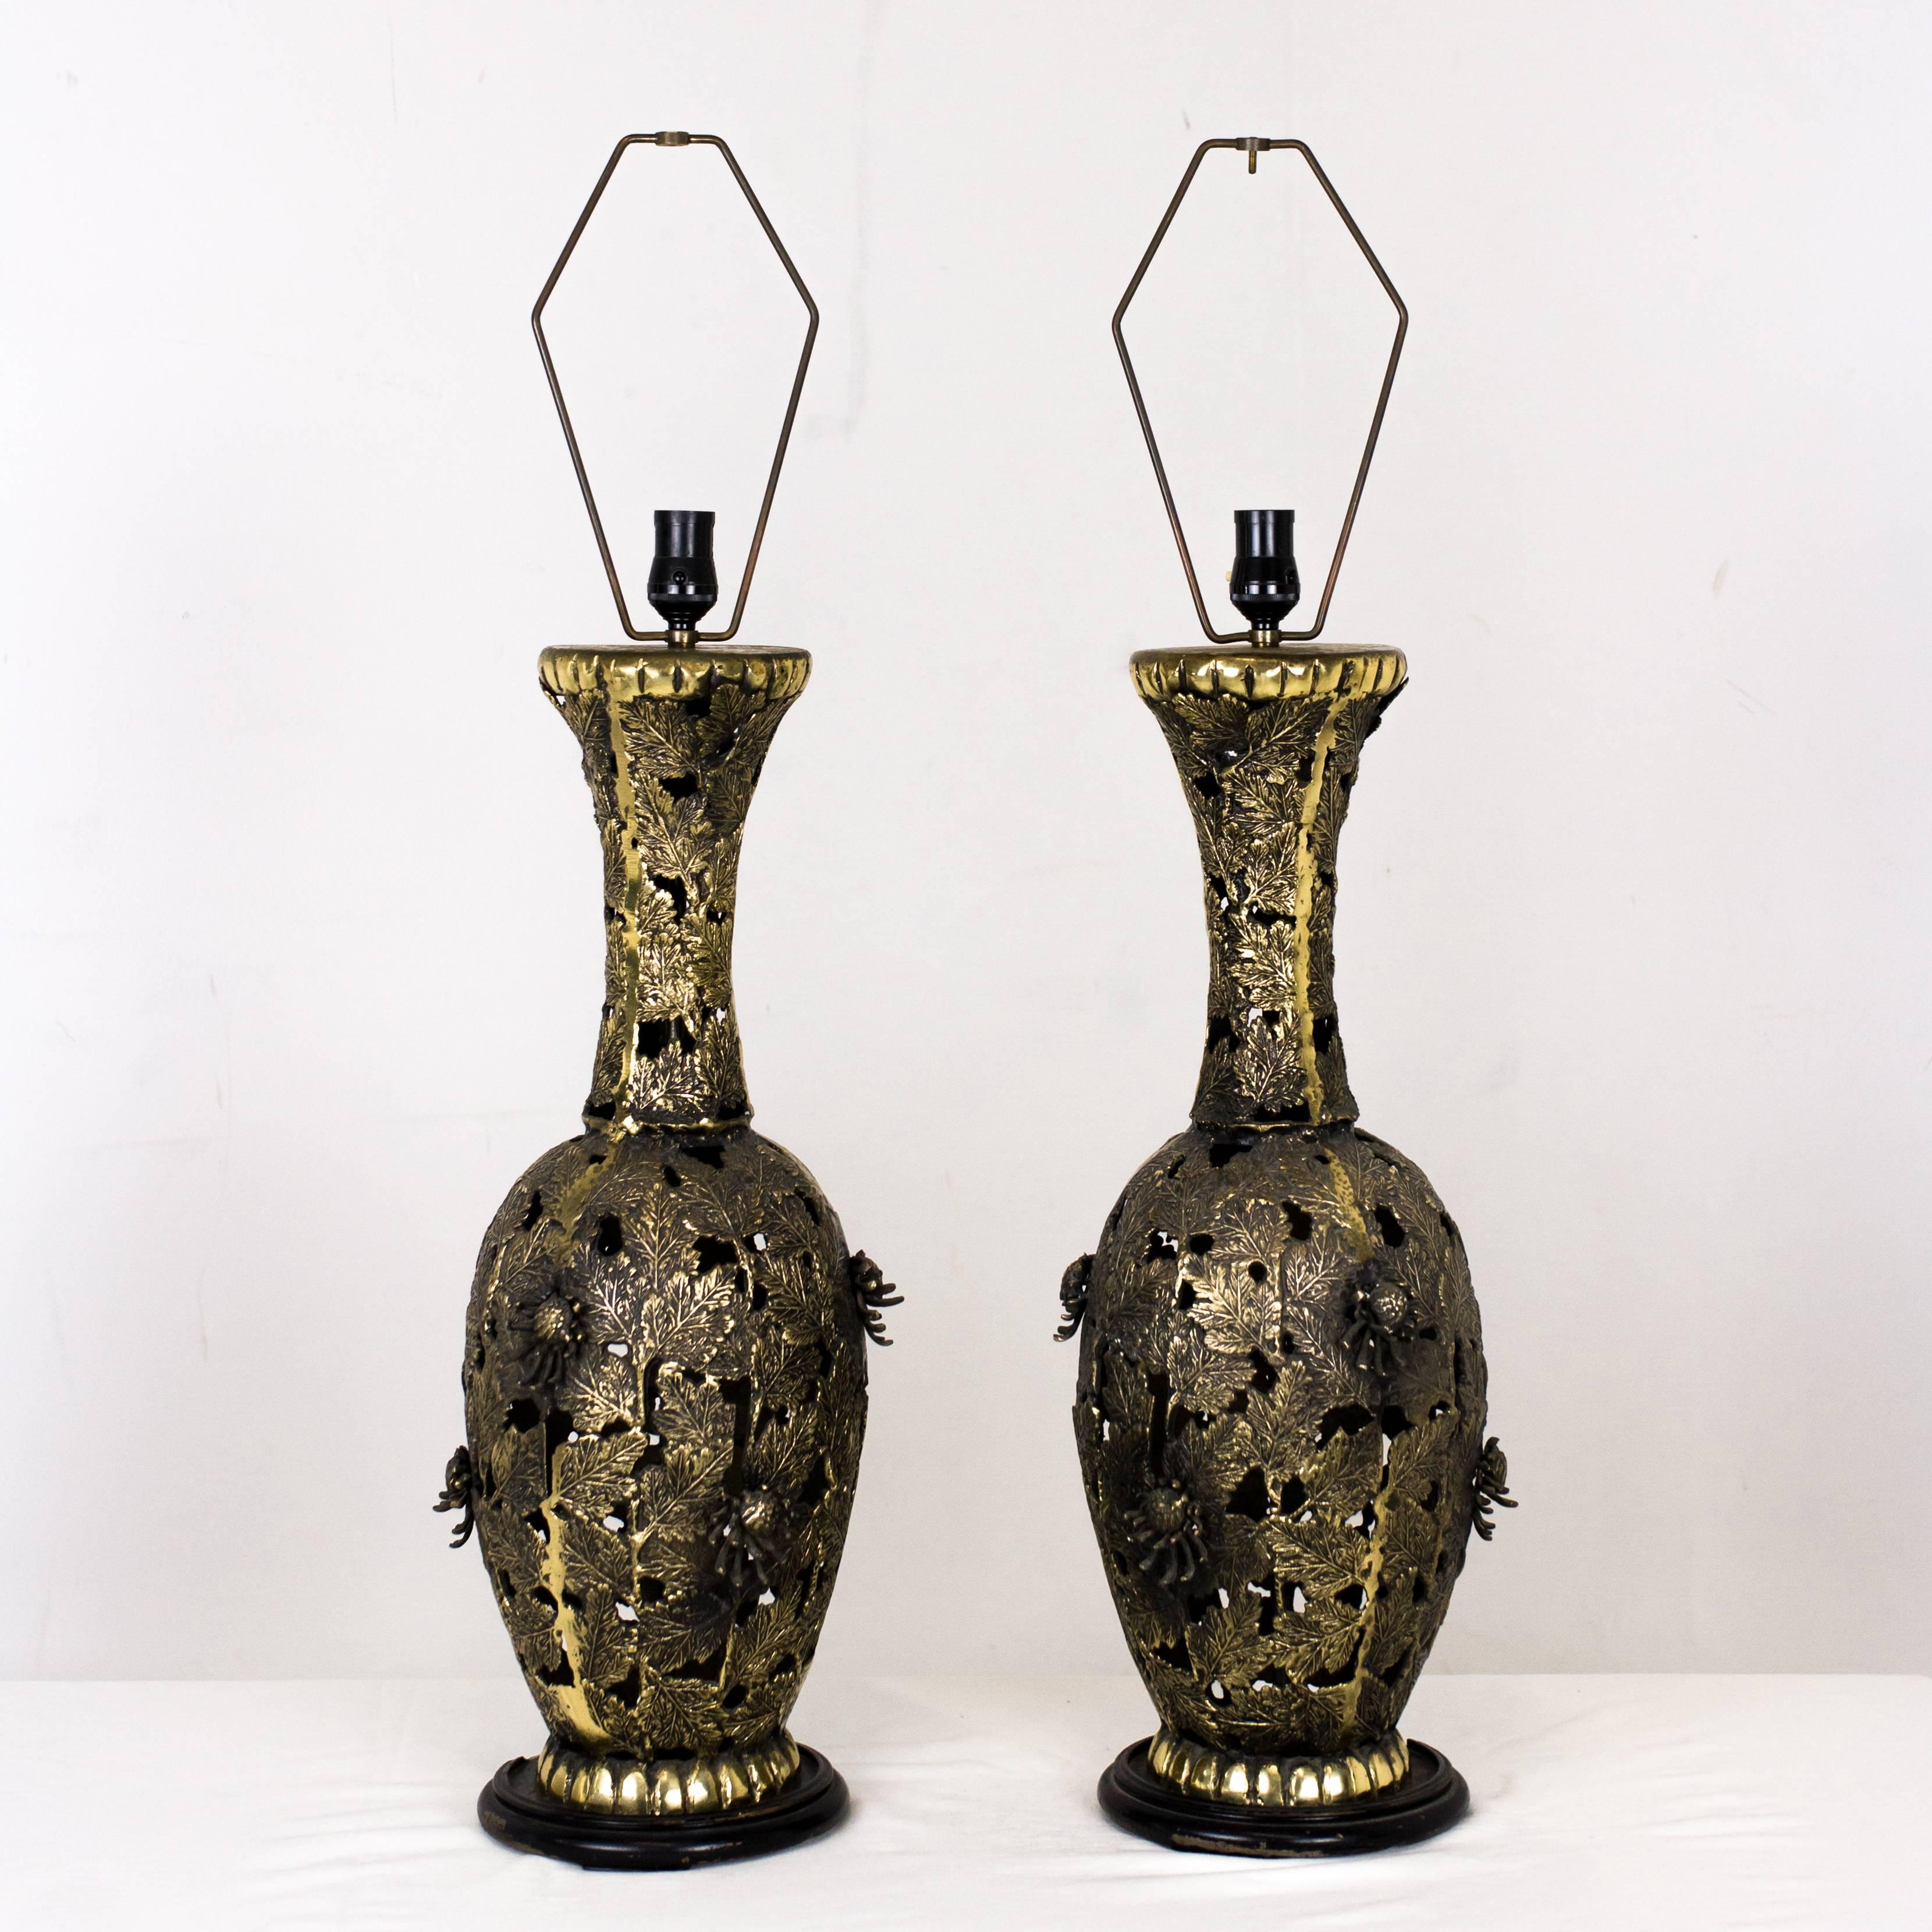 Pair of bronze Brutalist style table tamps. Lamps are in good vintage condition with wear due to age and use, circa 1970s

Dimensions:
9